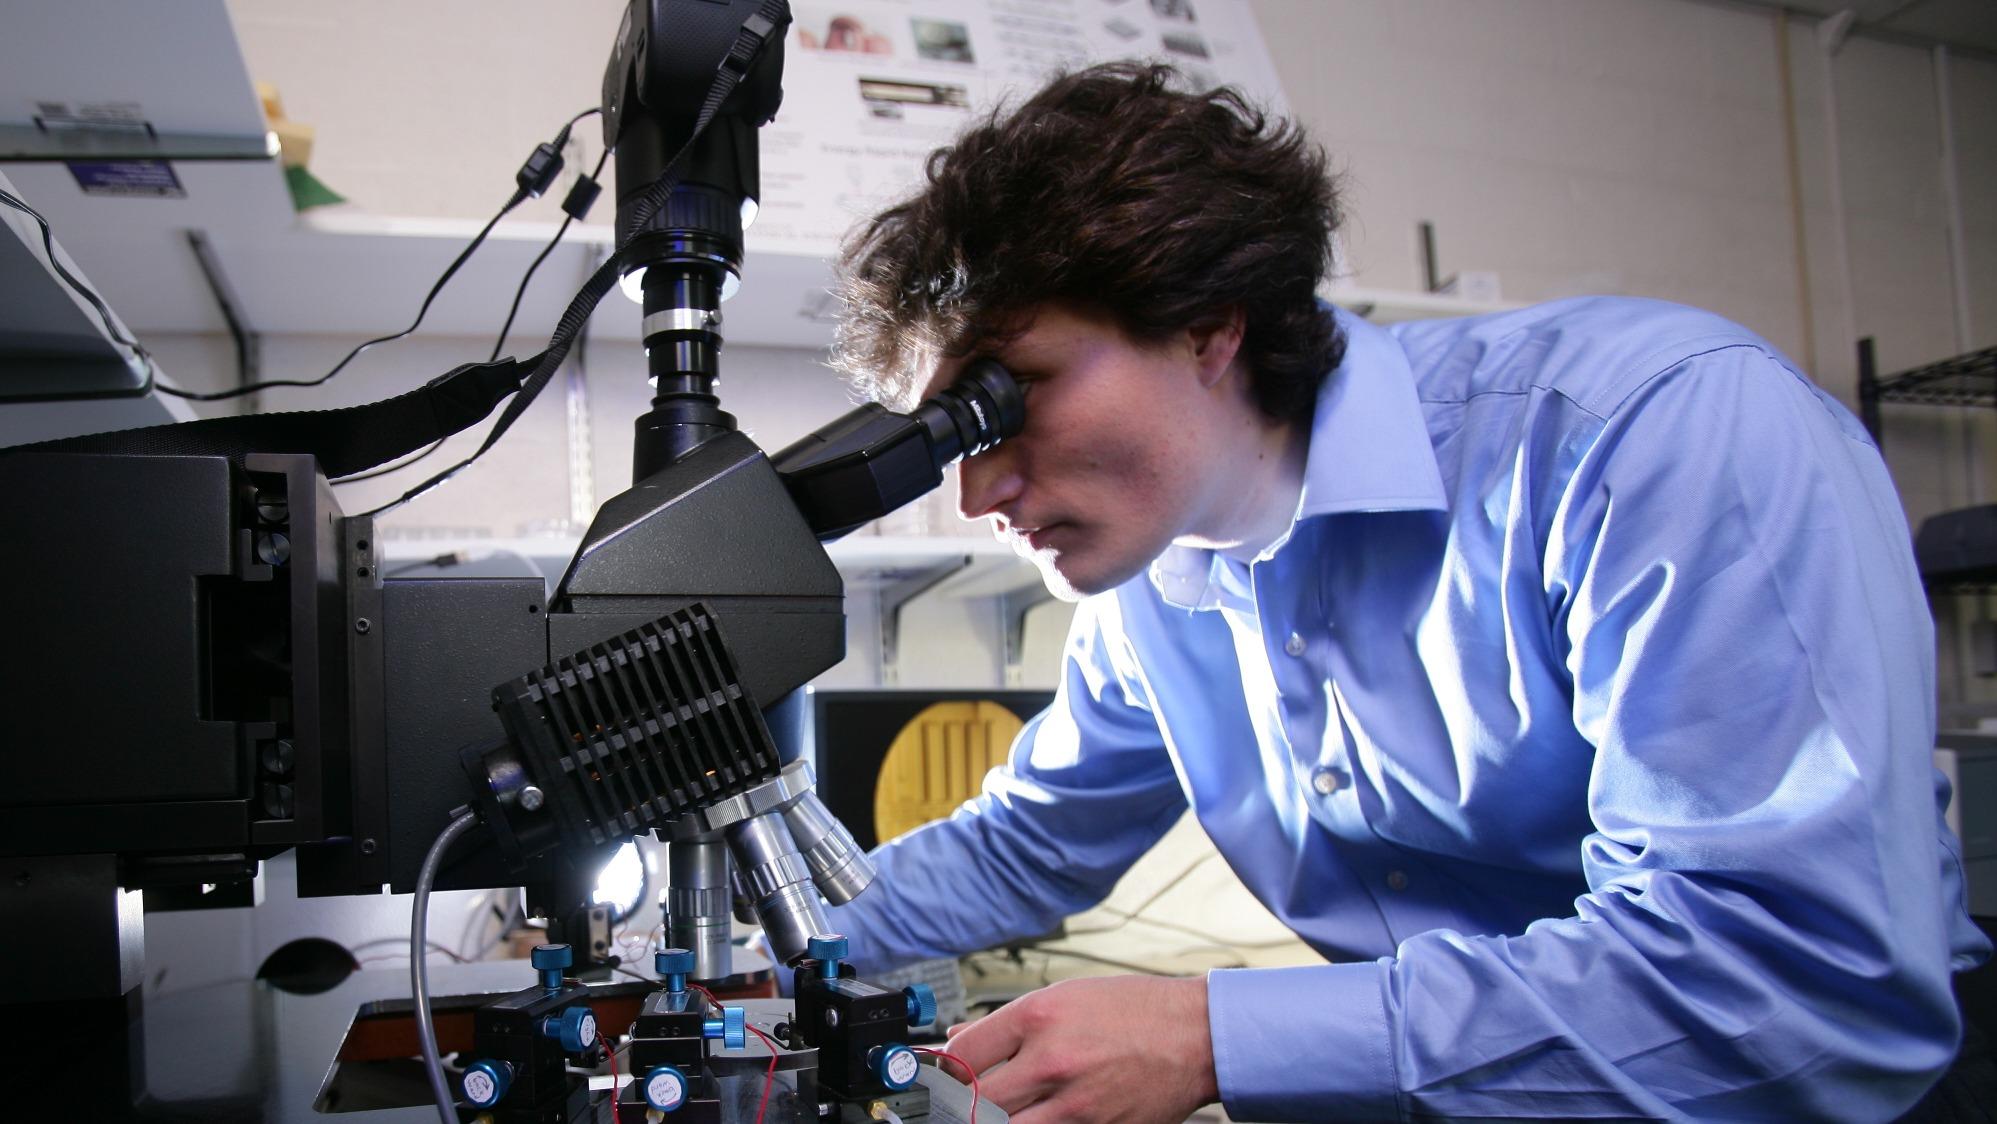 Researcher works in the micro robotics lab.